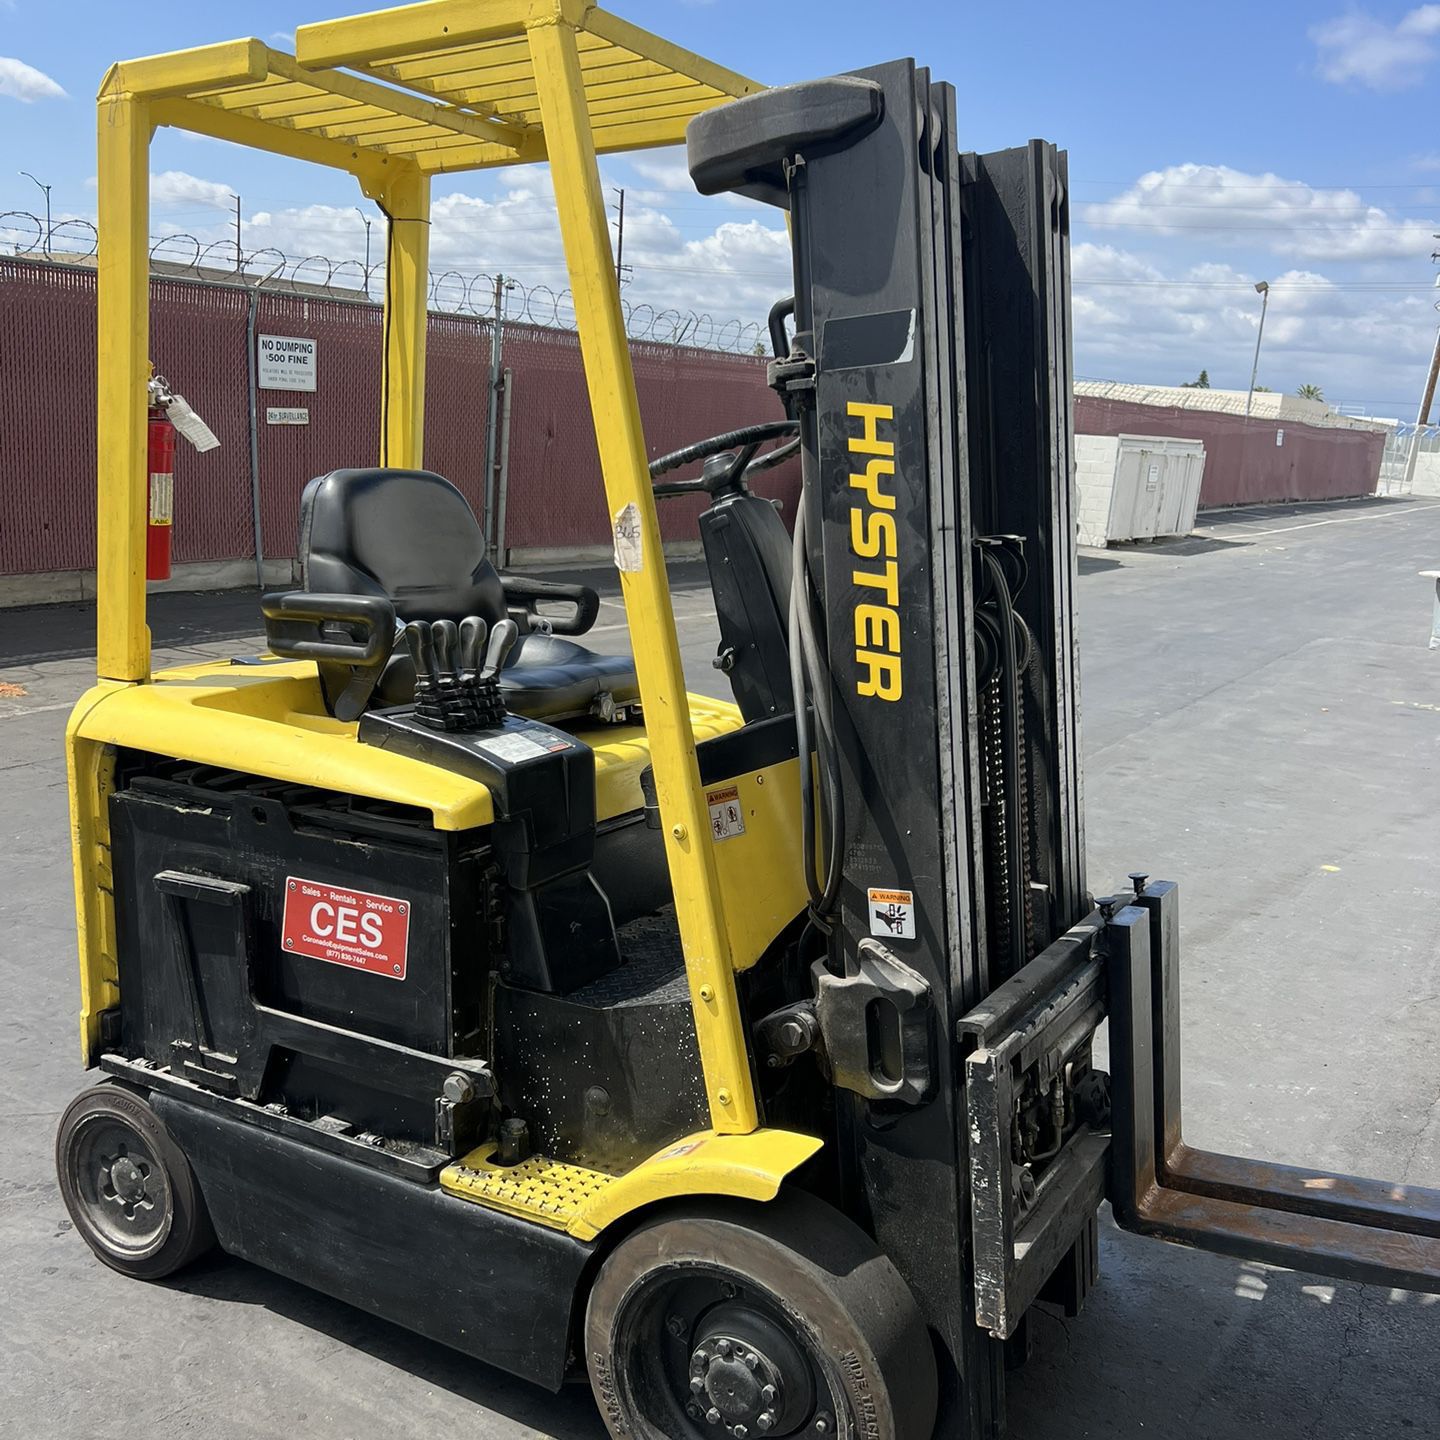 Hyster Electric Forklift 